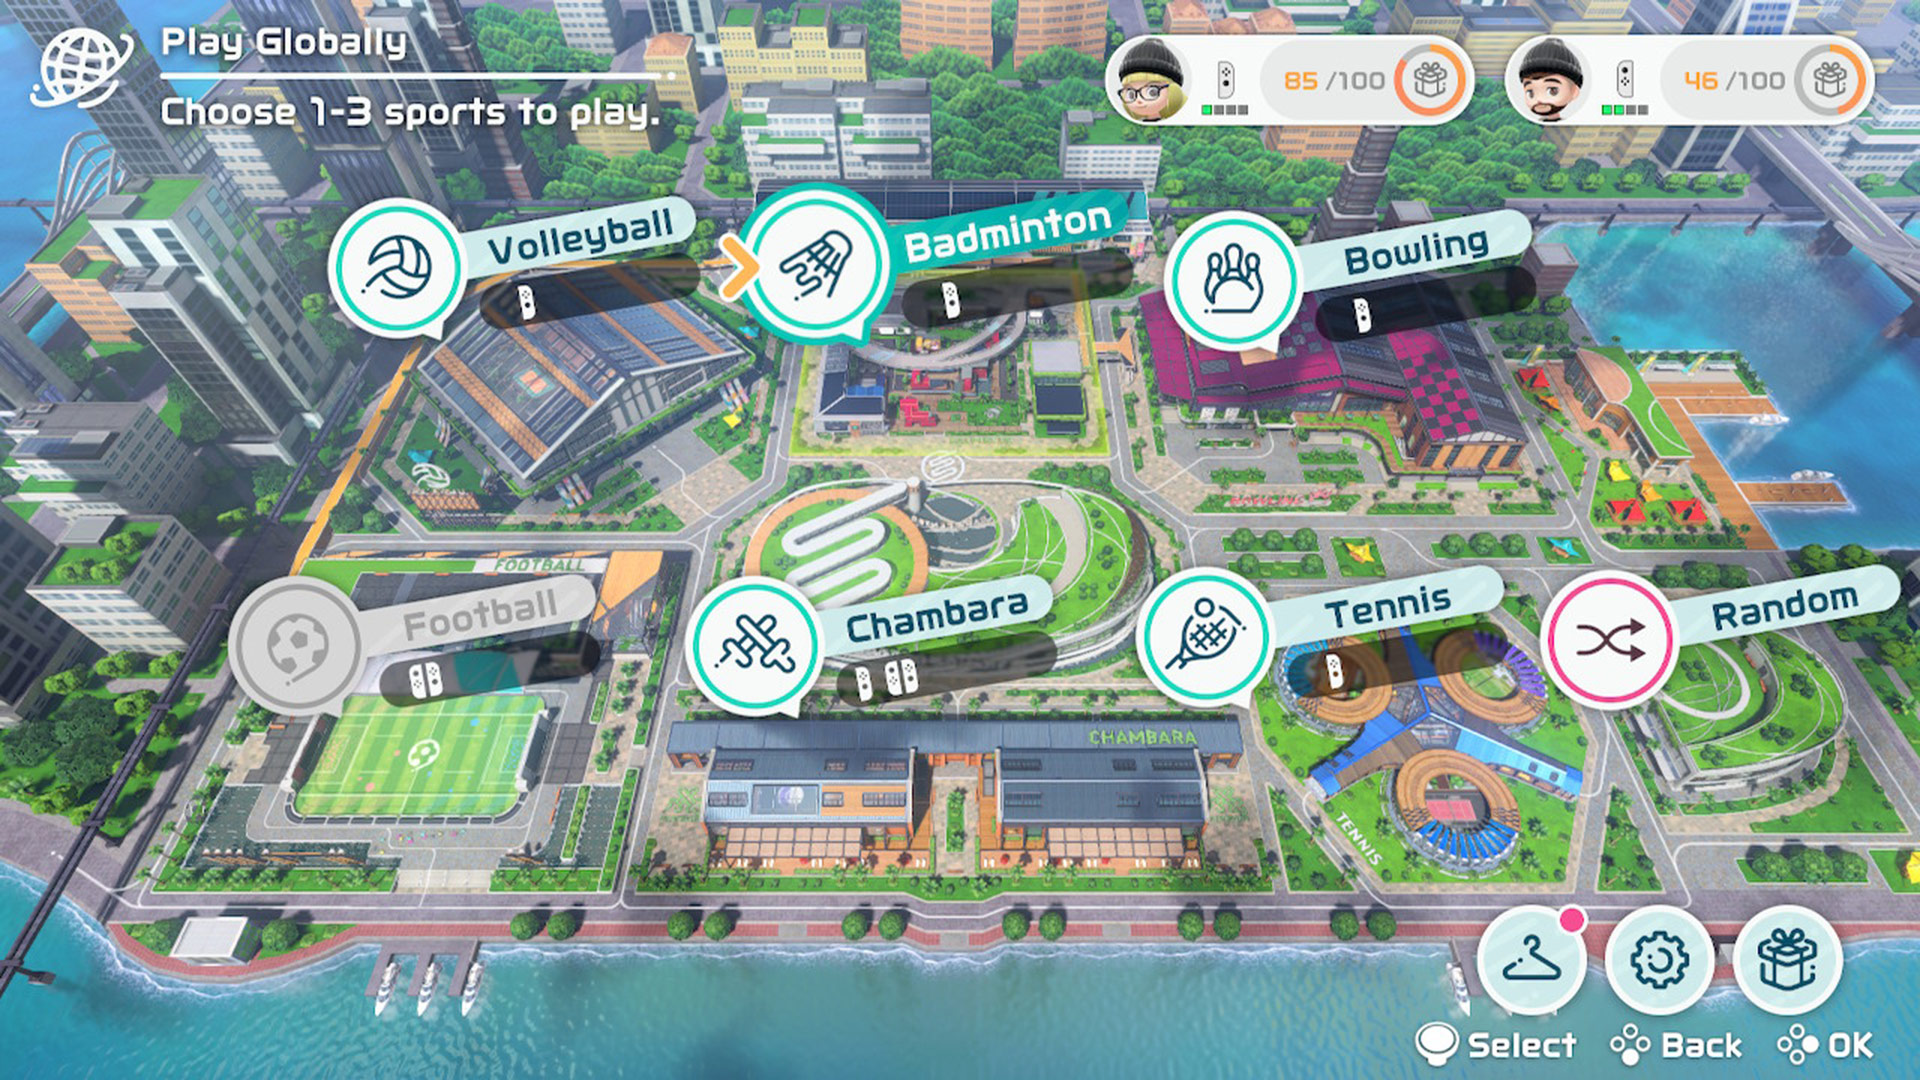 A screen from Nintendo Switch Sports showing the main game selection screen